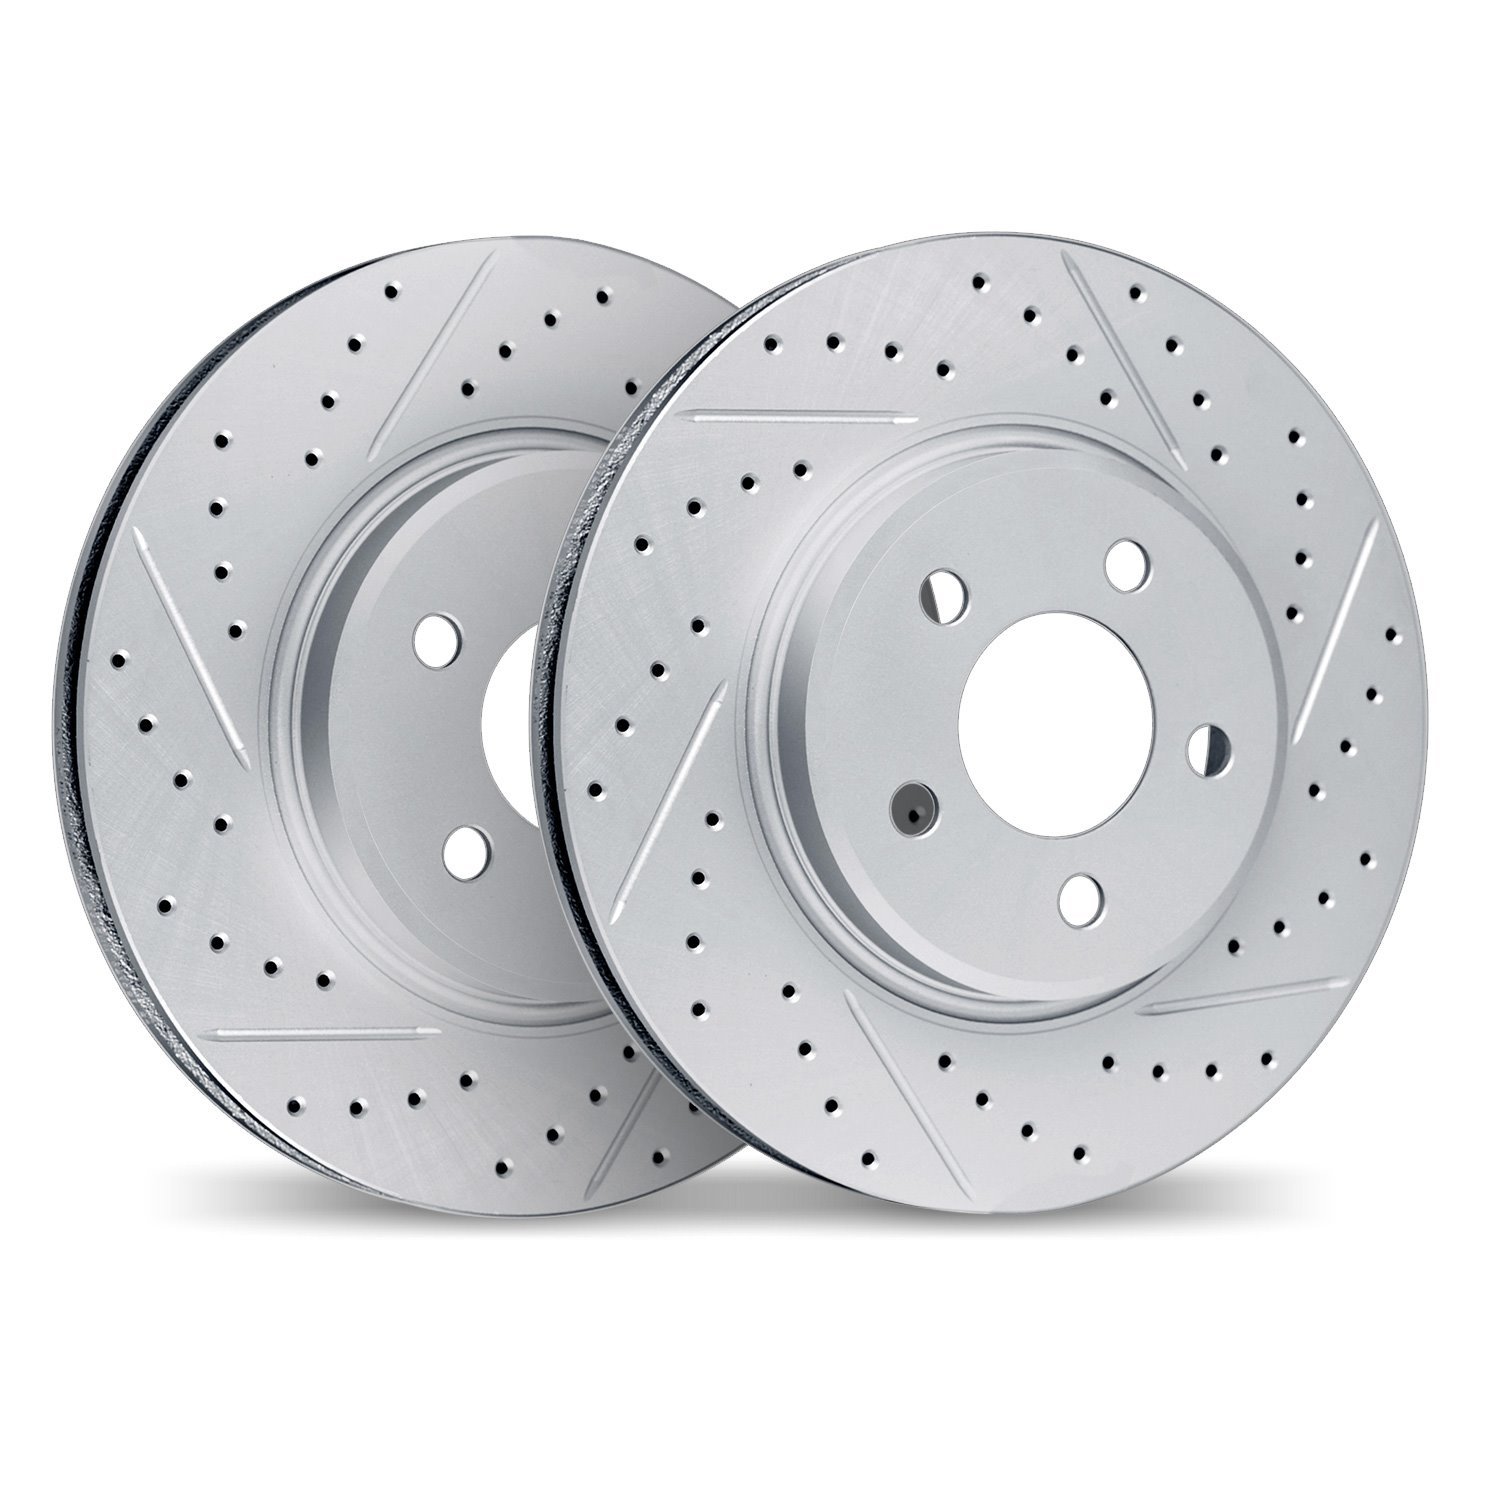 2002-47000 Geoperformance Drilled/Slotted Brake Rotors, 1967-1974 GM, Position: Front